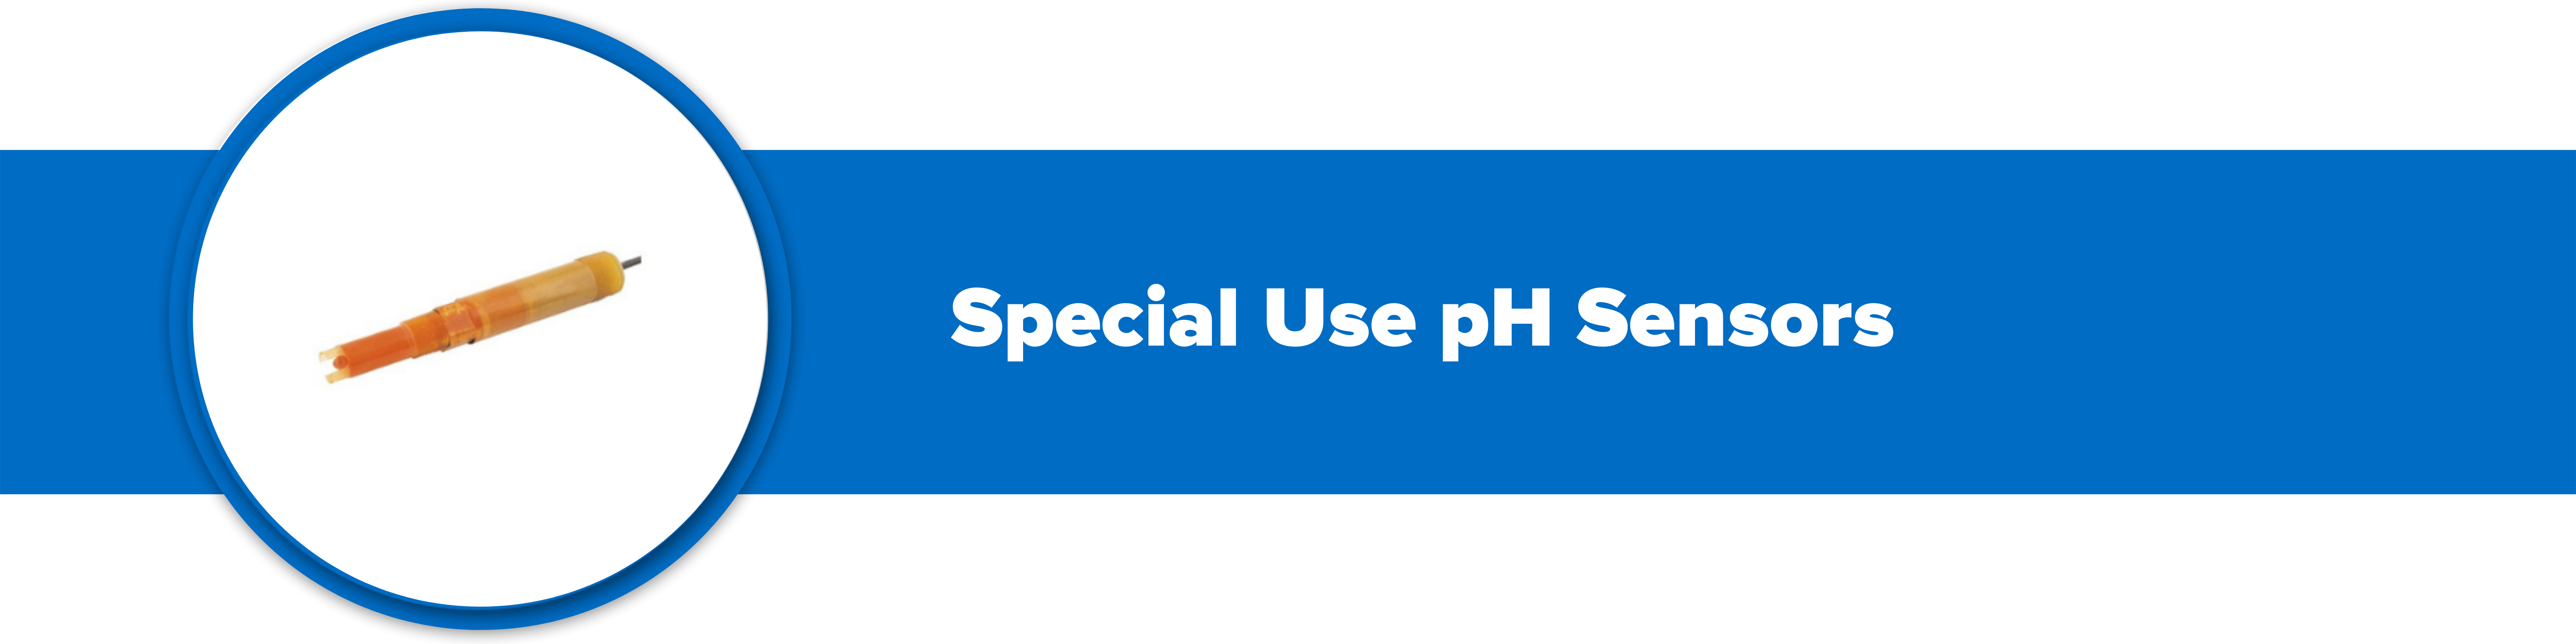 Header image with text 'special use pH sensors'.